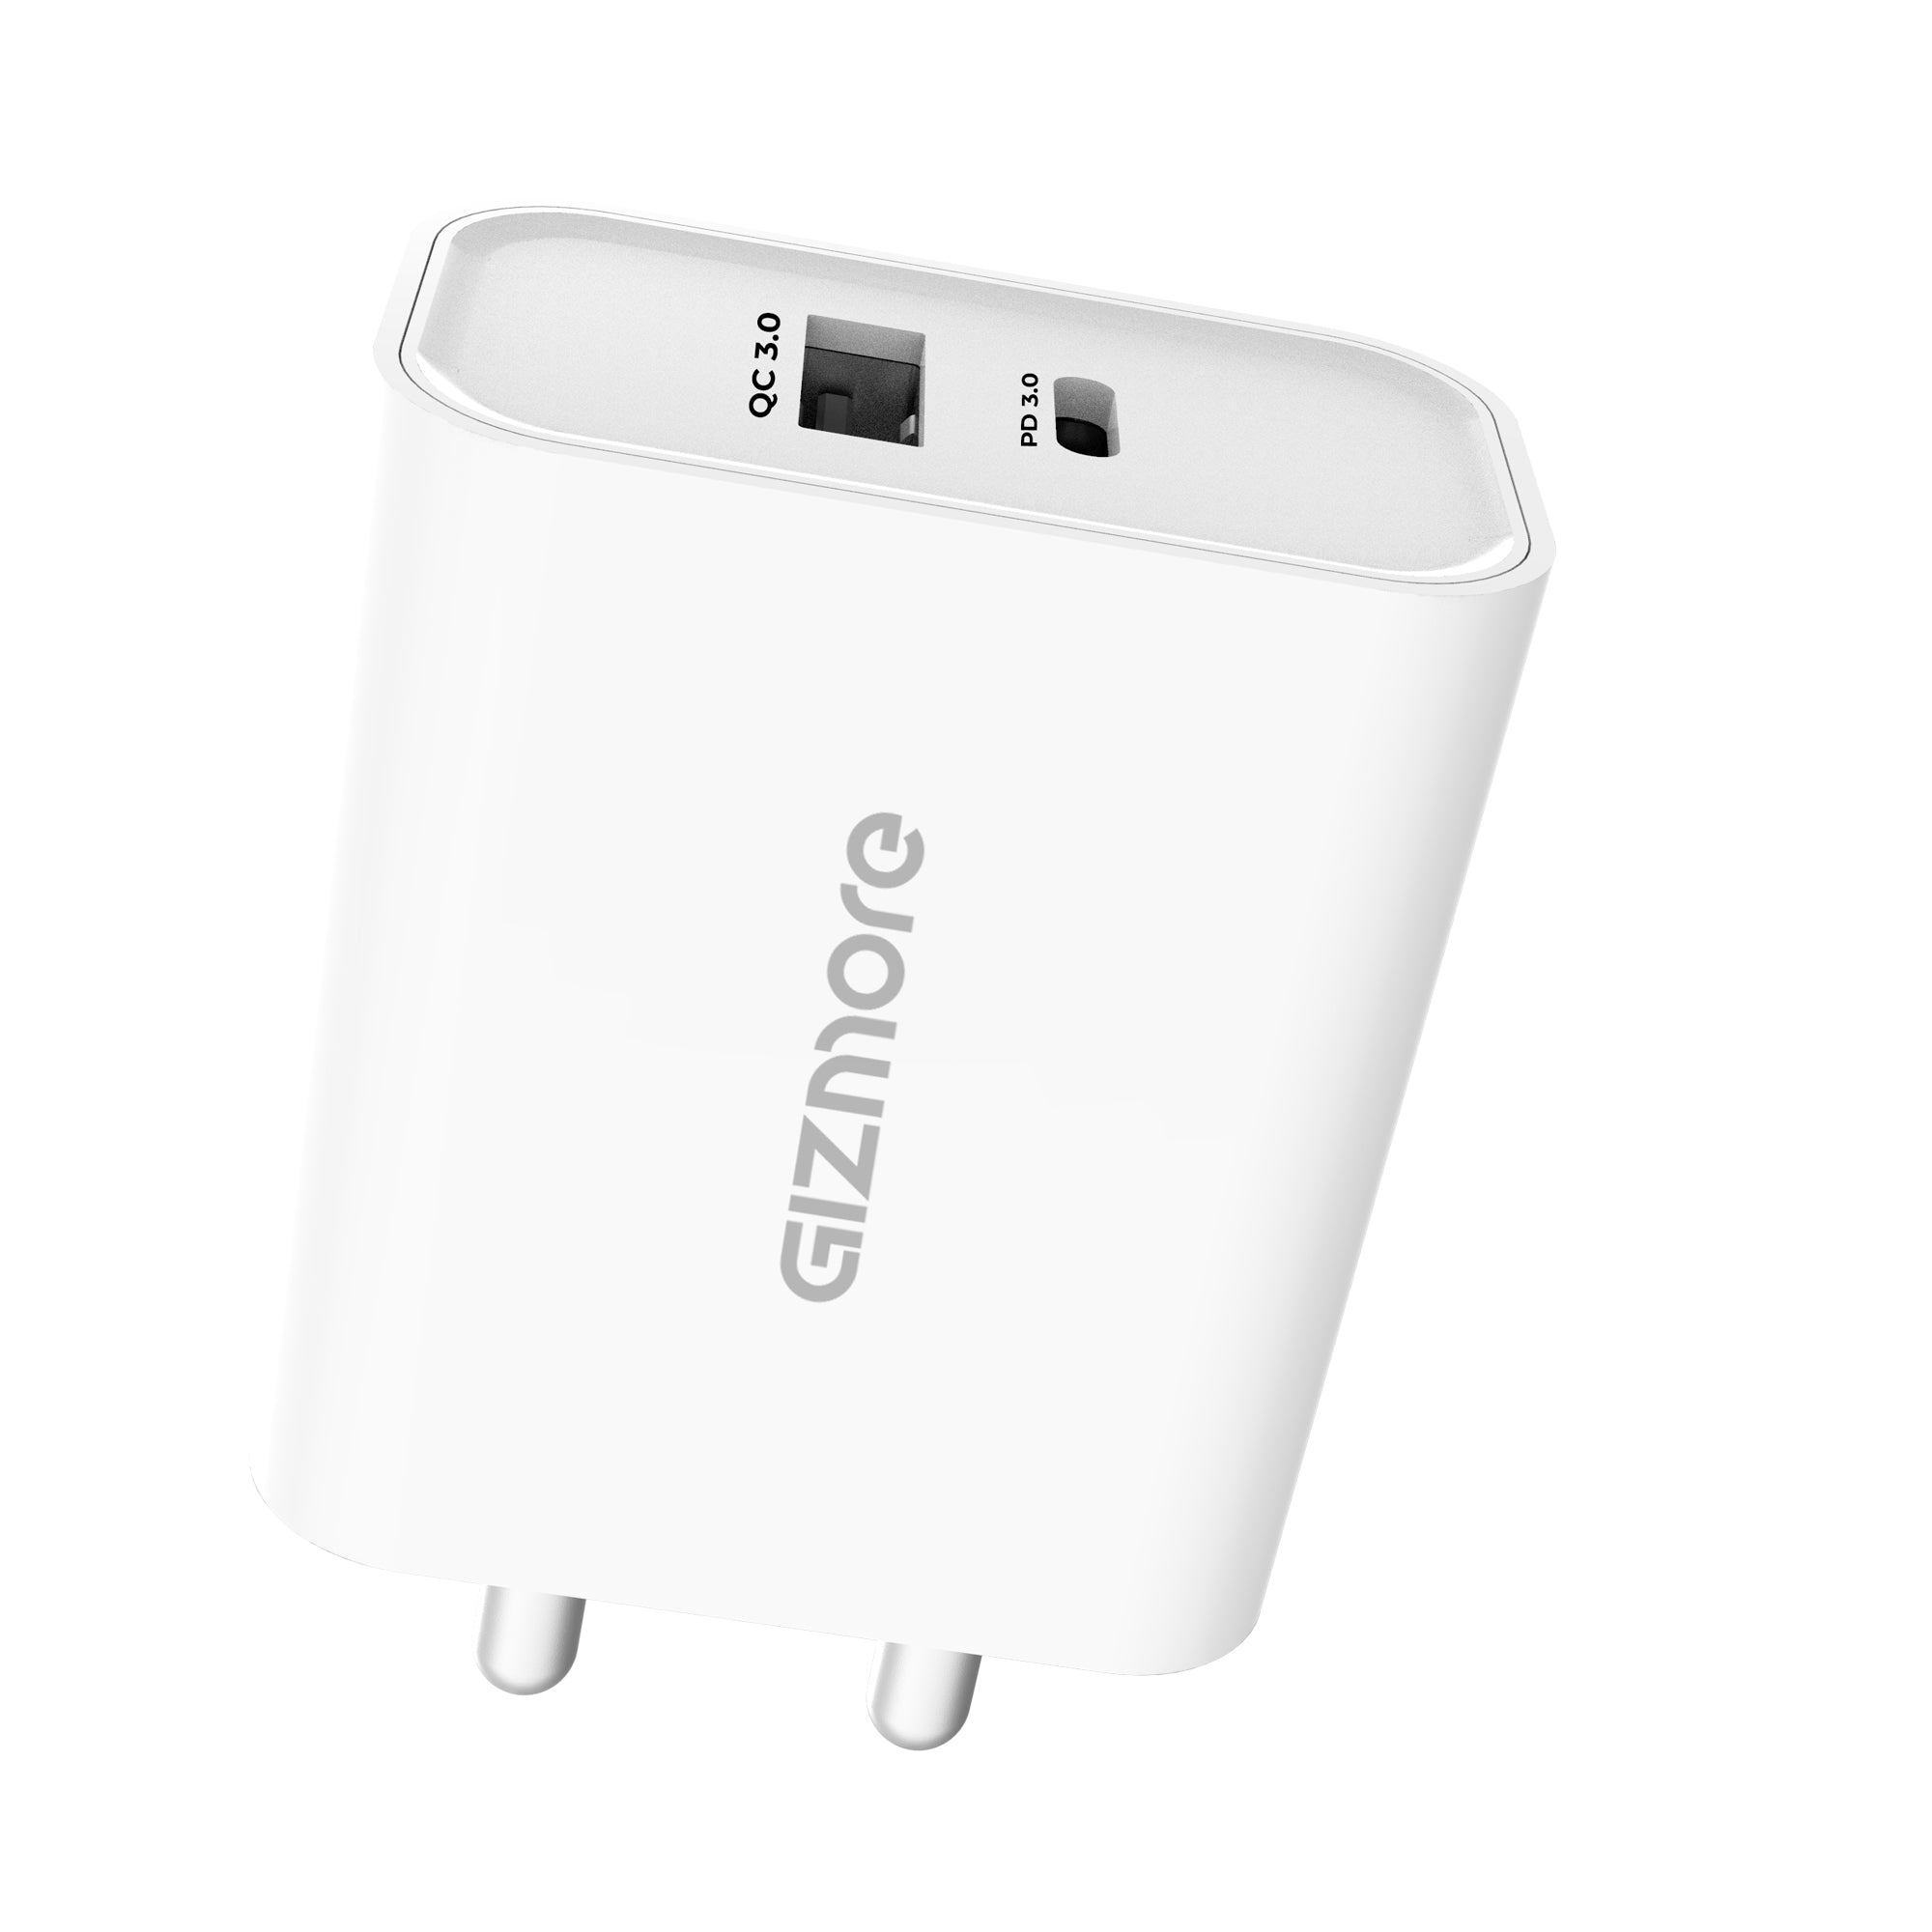 Gizmore 25 W Quick Charge 3 A Mobile PA611 Super Fast QCPD With Type C Port (BIS Certified, Universal Compatible) Charger (White)